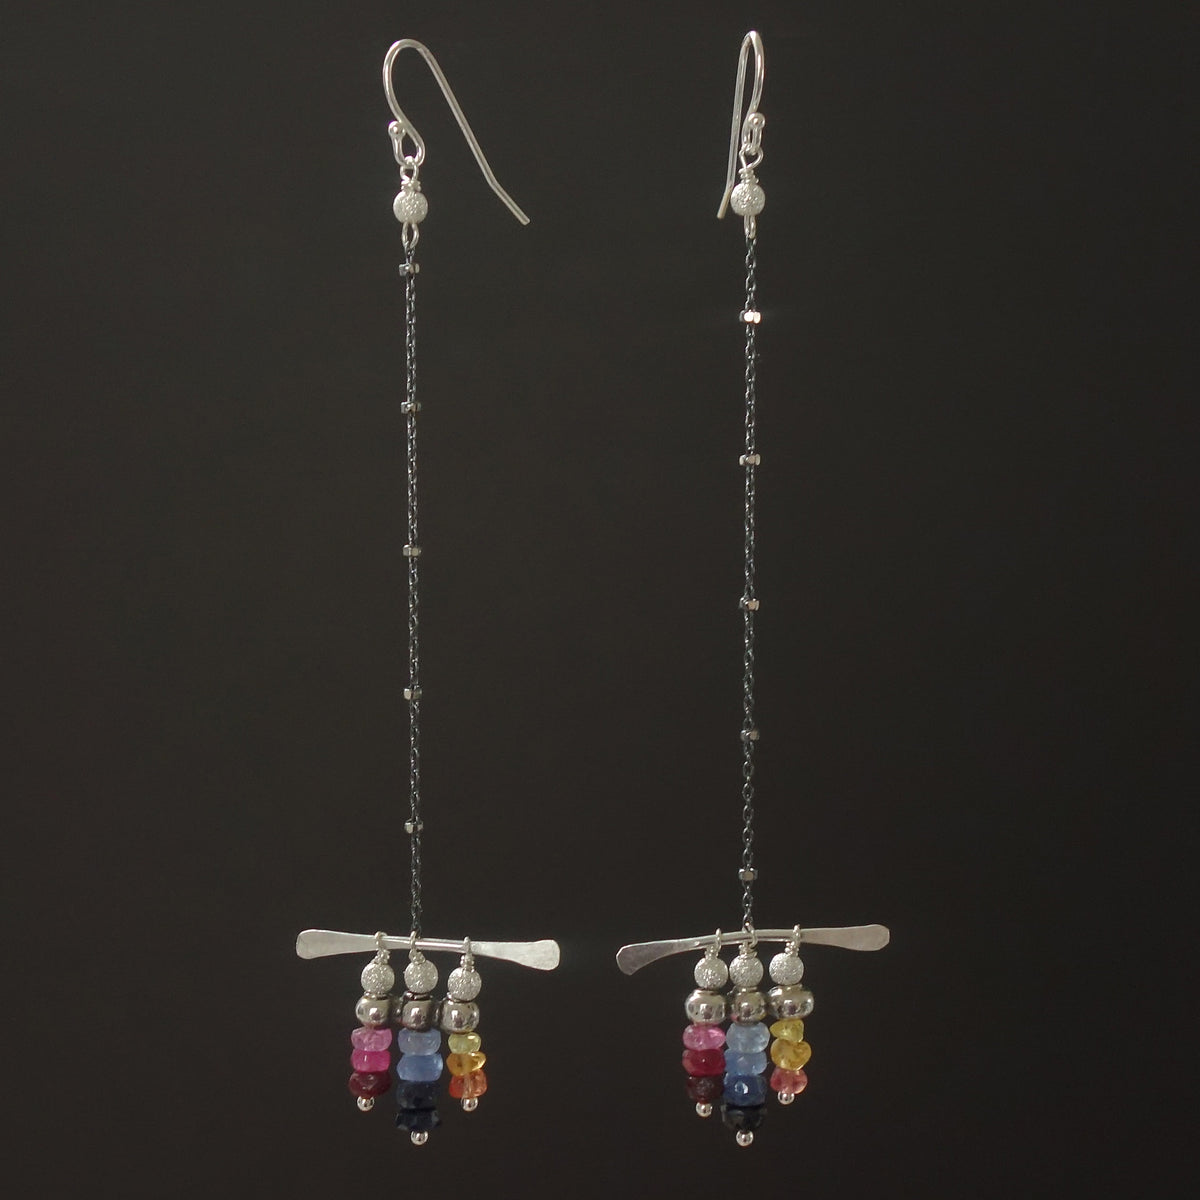 Rainbow sapphire and hammered silver earrings